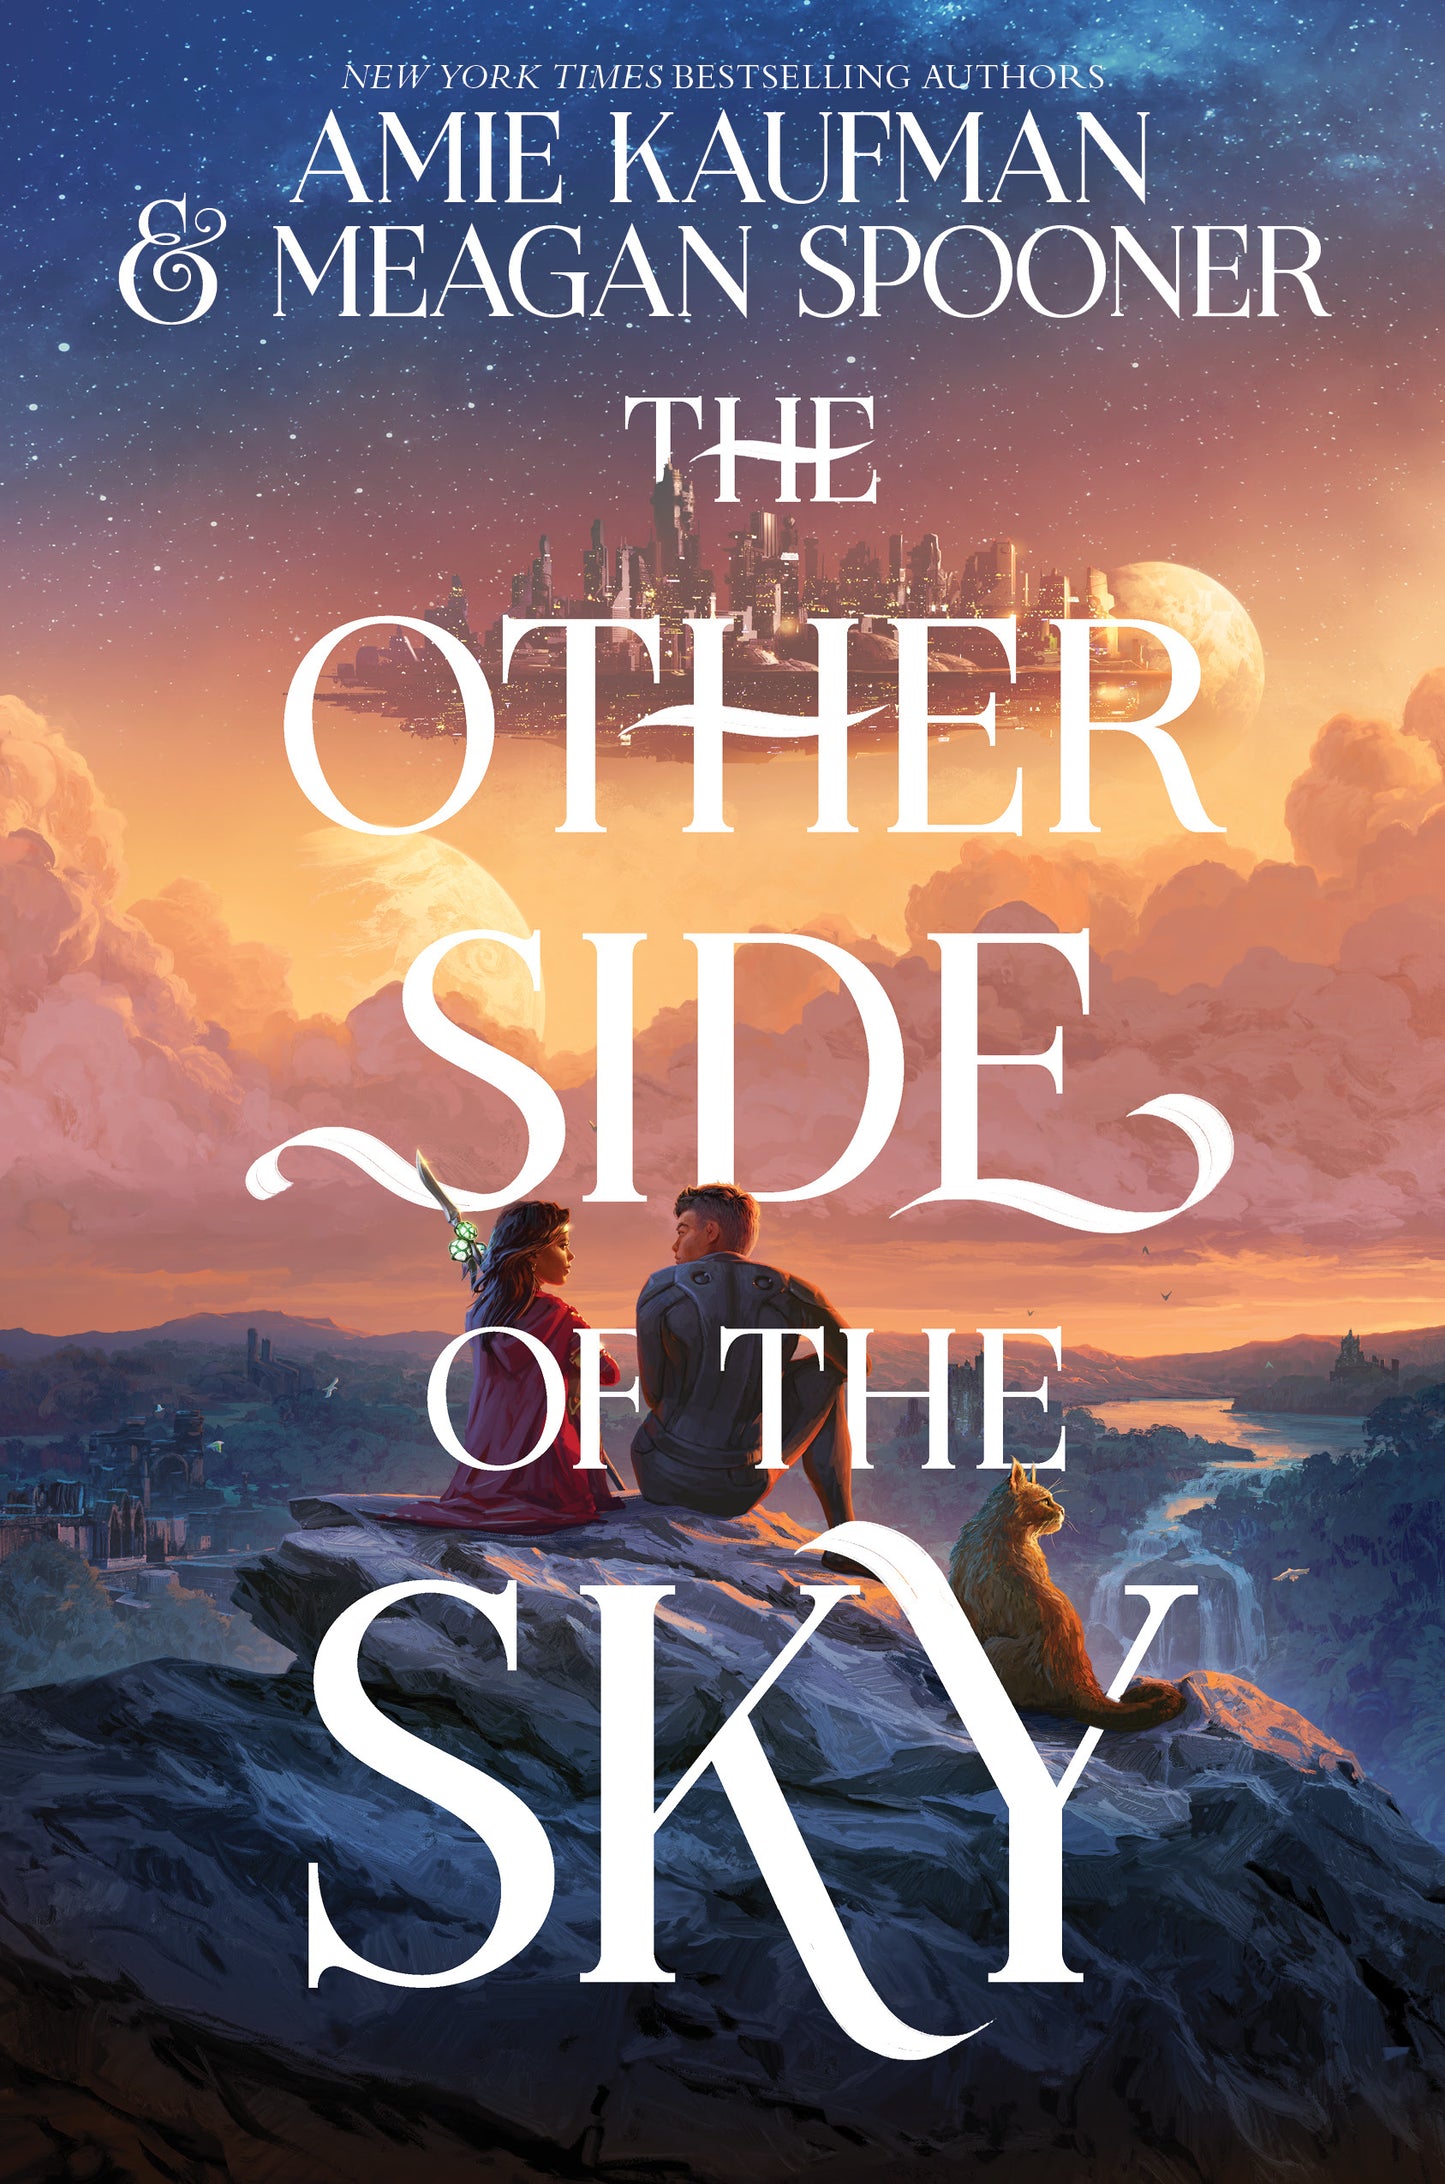 The Other Side of the Sky (The Other Side of the Sky #1)